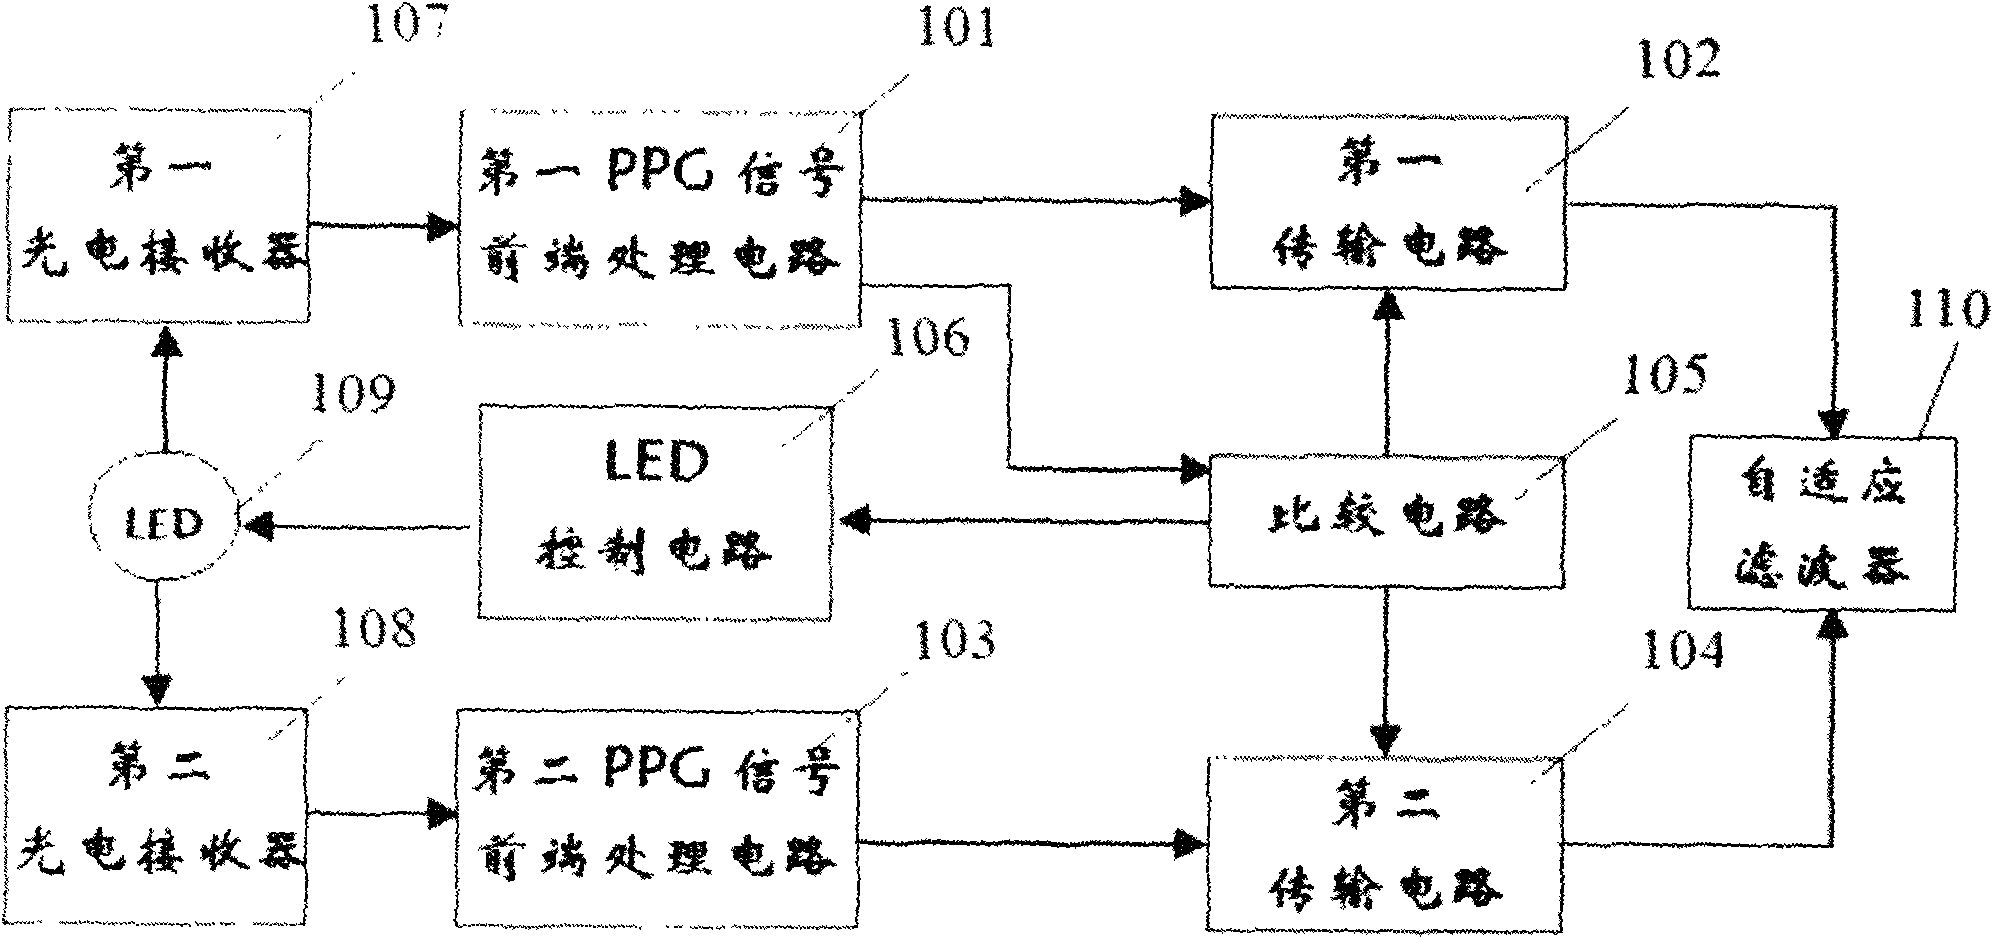 Low-power consumption and high-precision front processing module of photoelectric plethysmograph signal based on ambient light